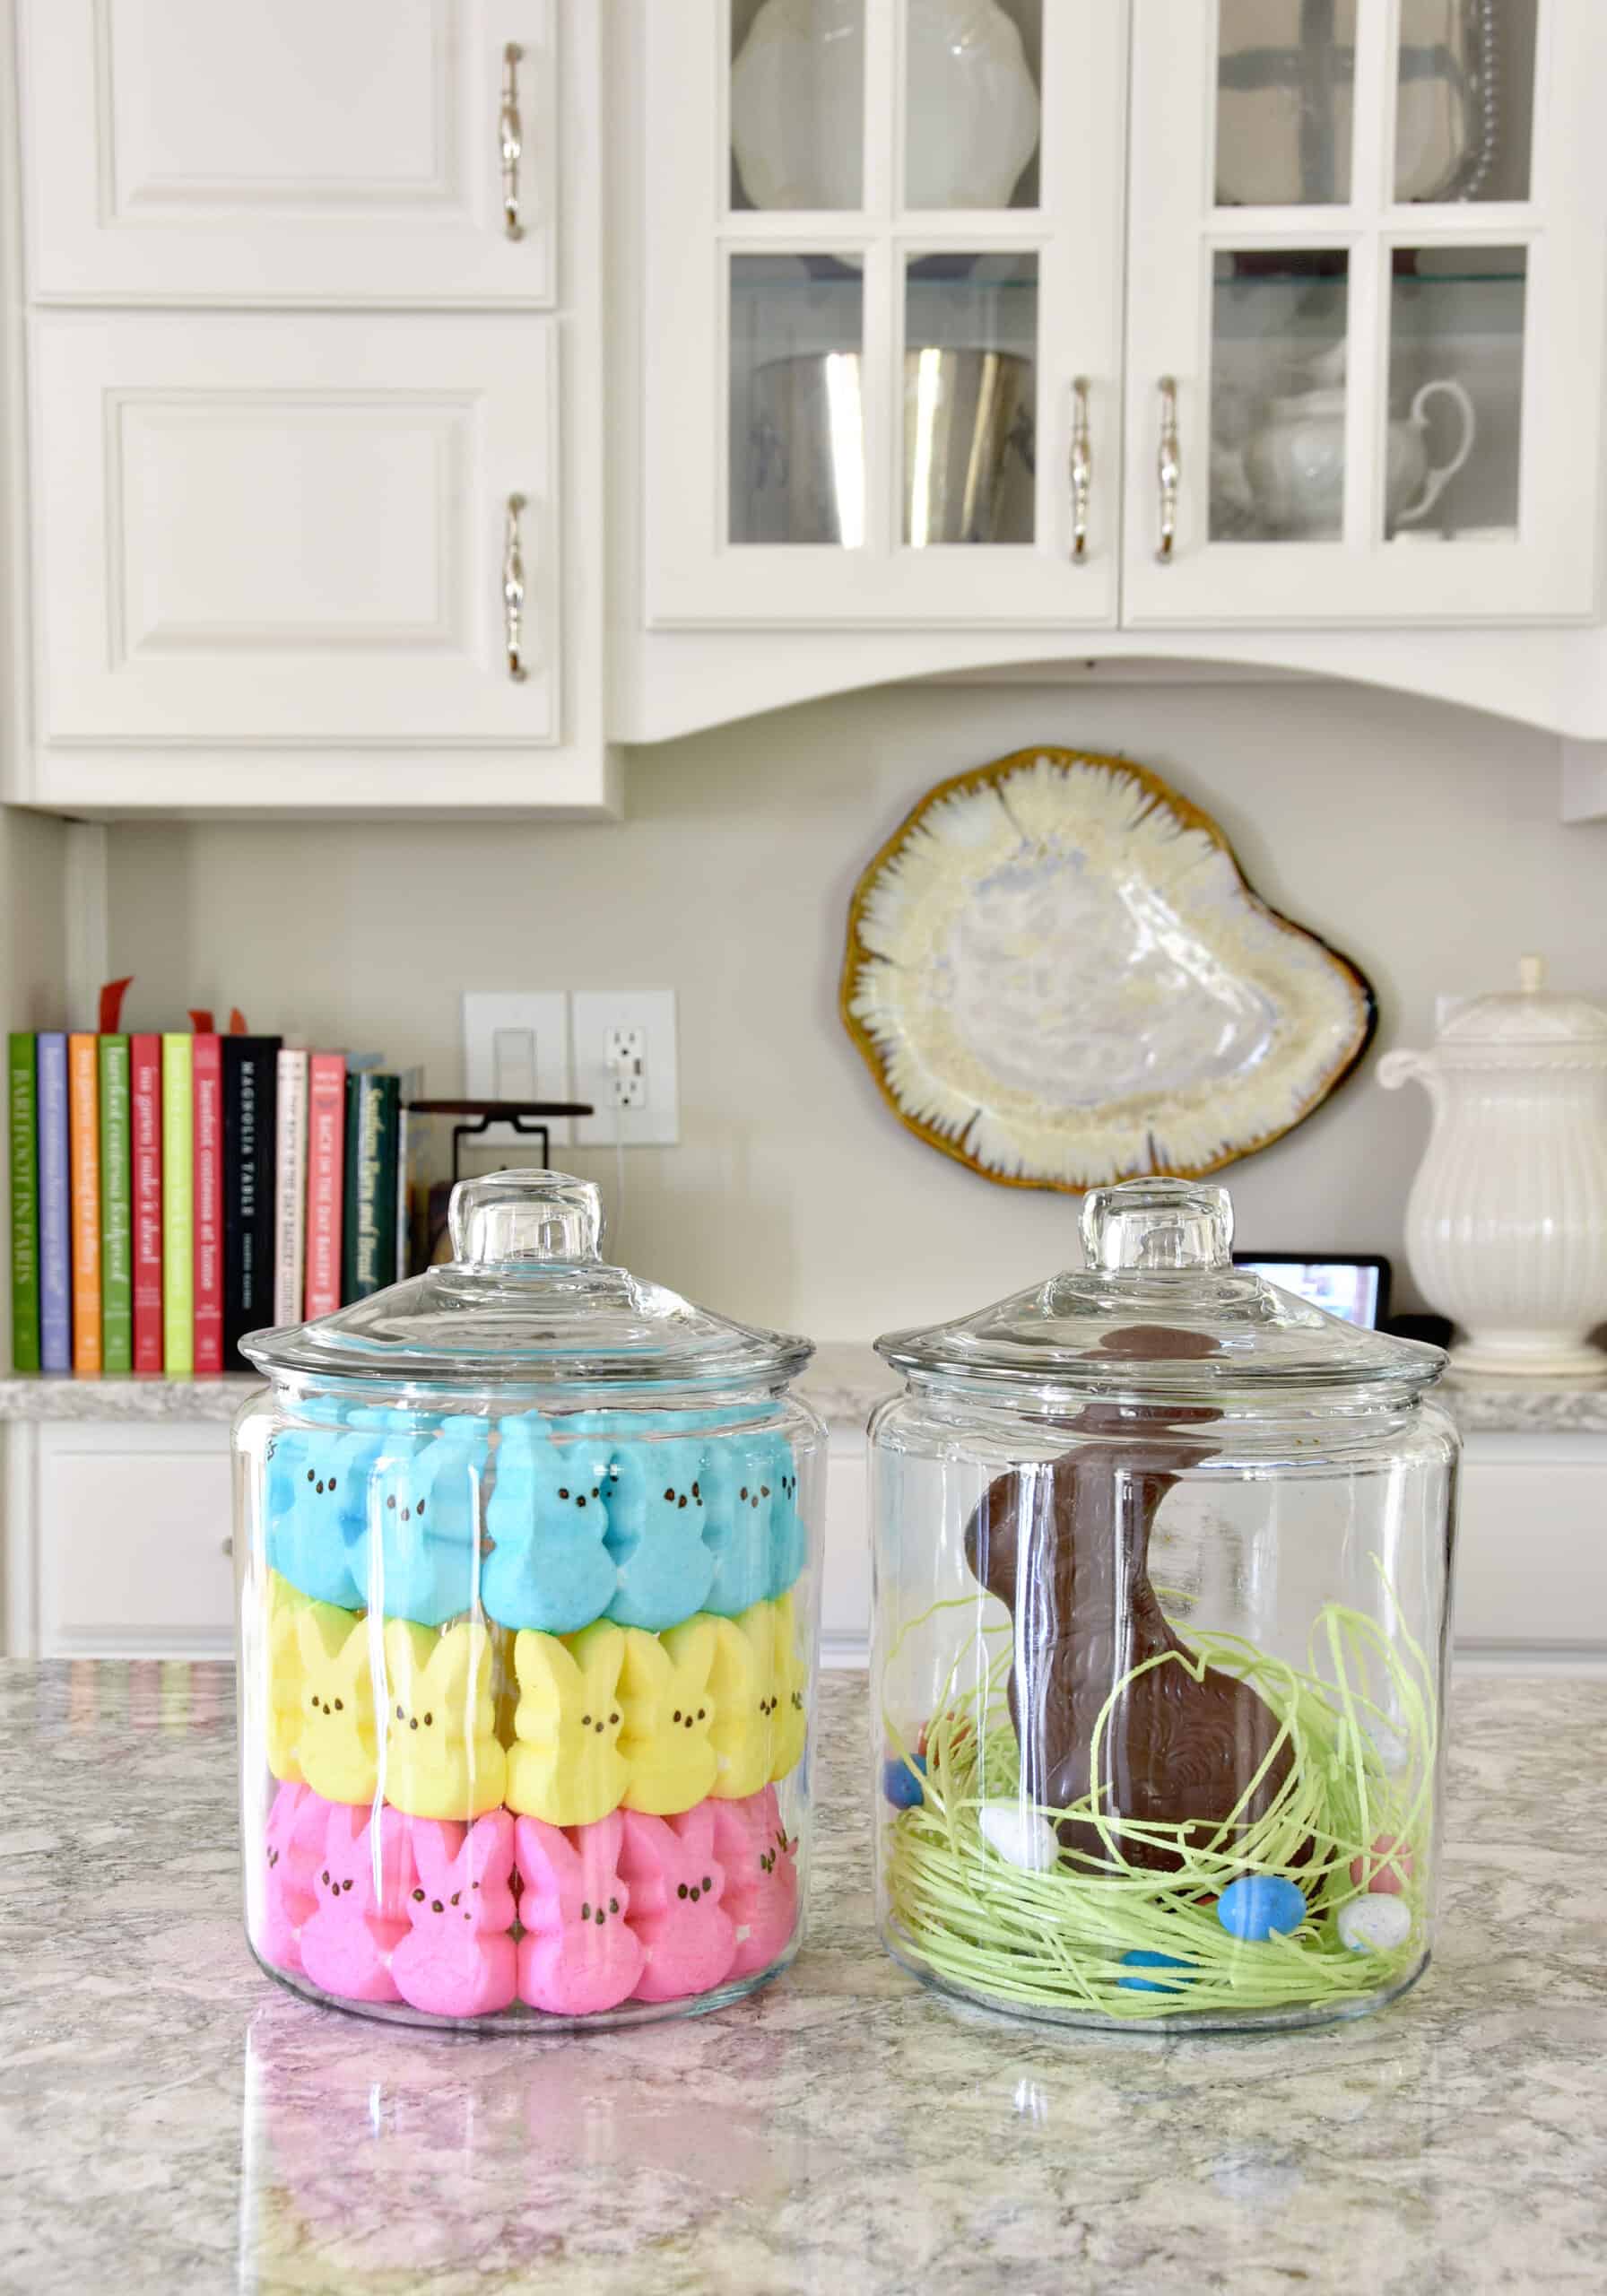 Colorful Easter Décor in Kitchen - Soul & Lane